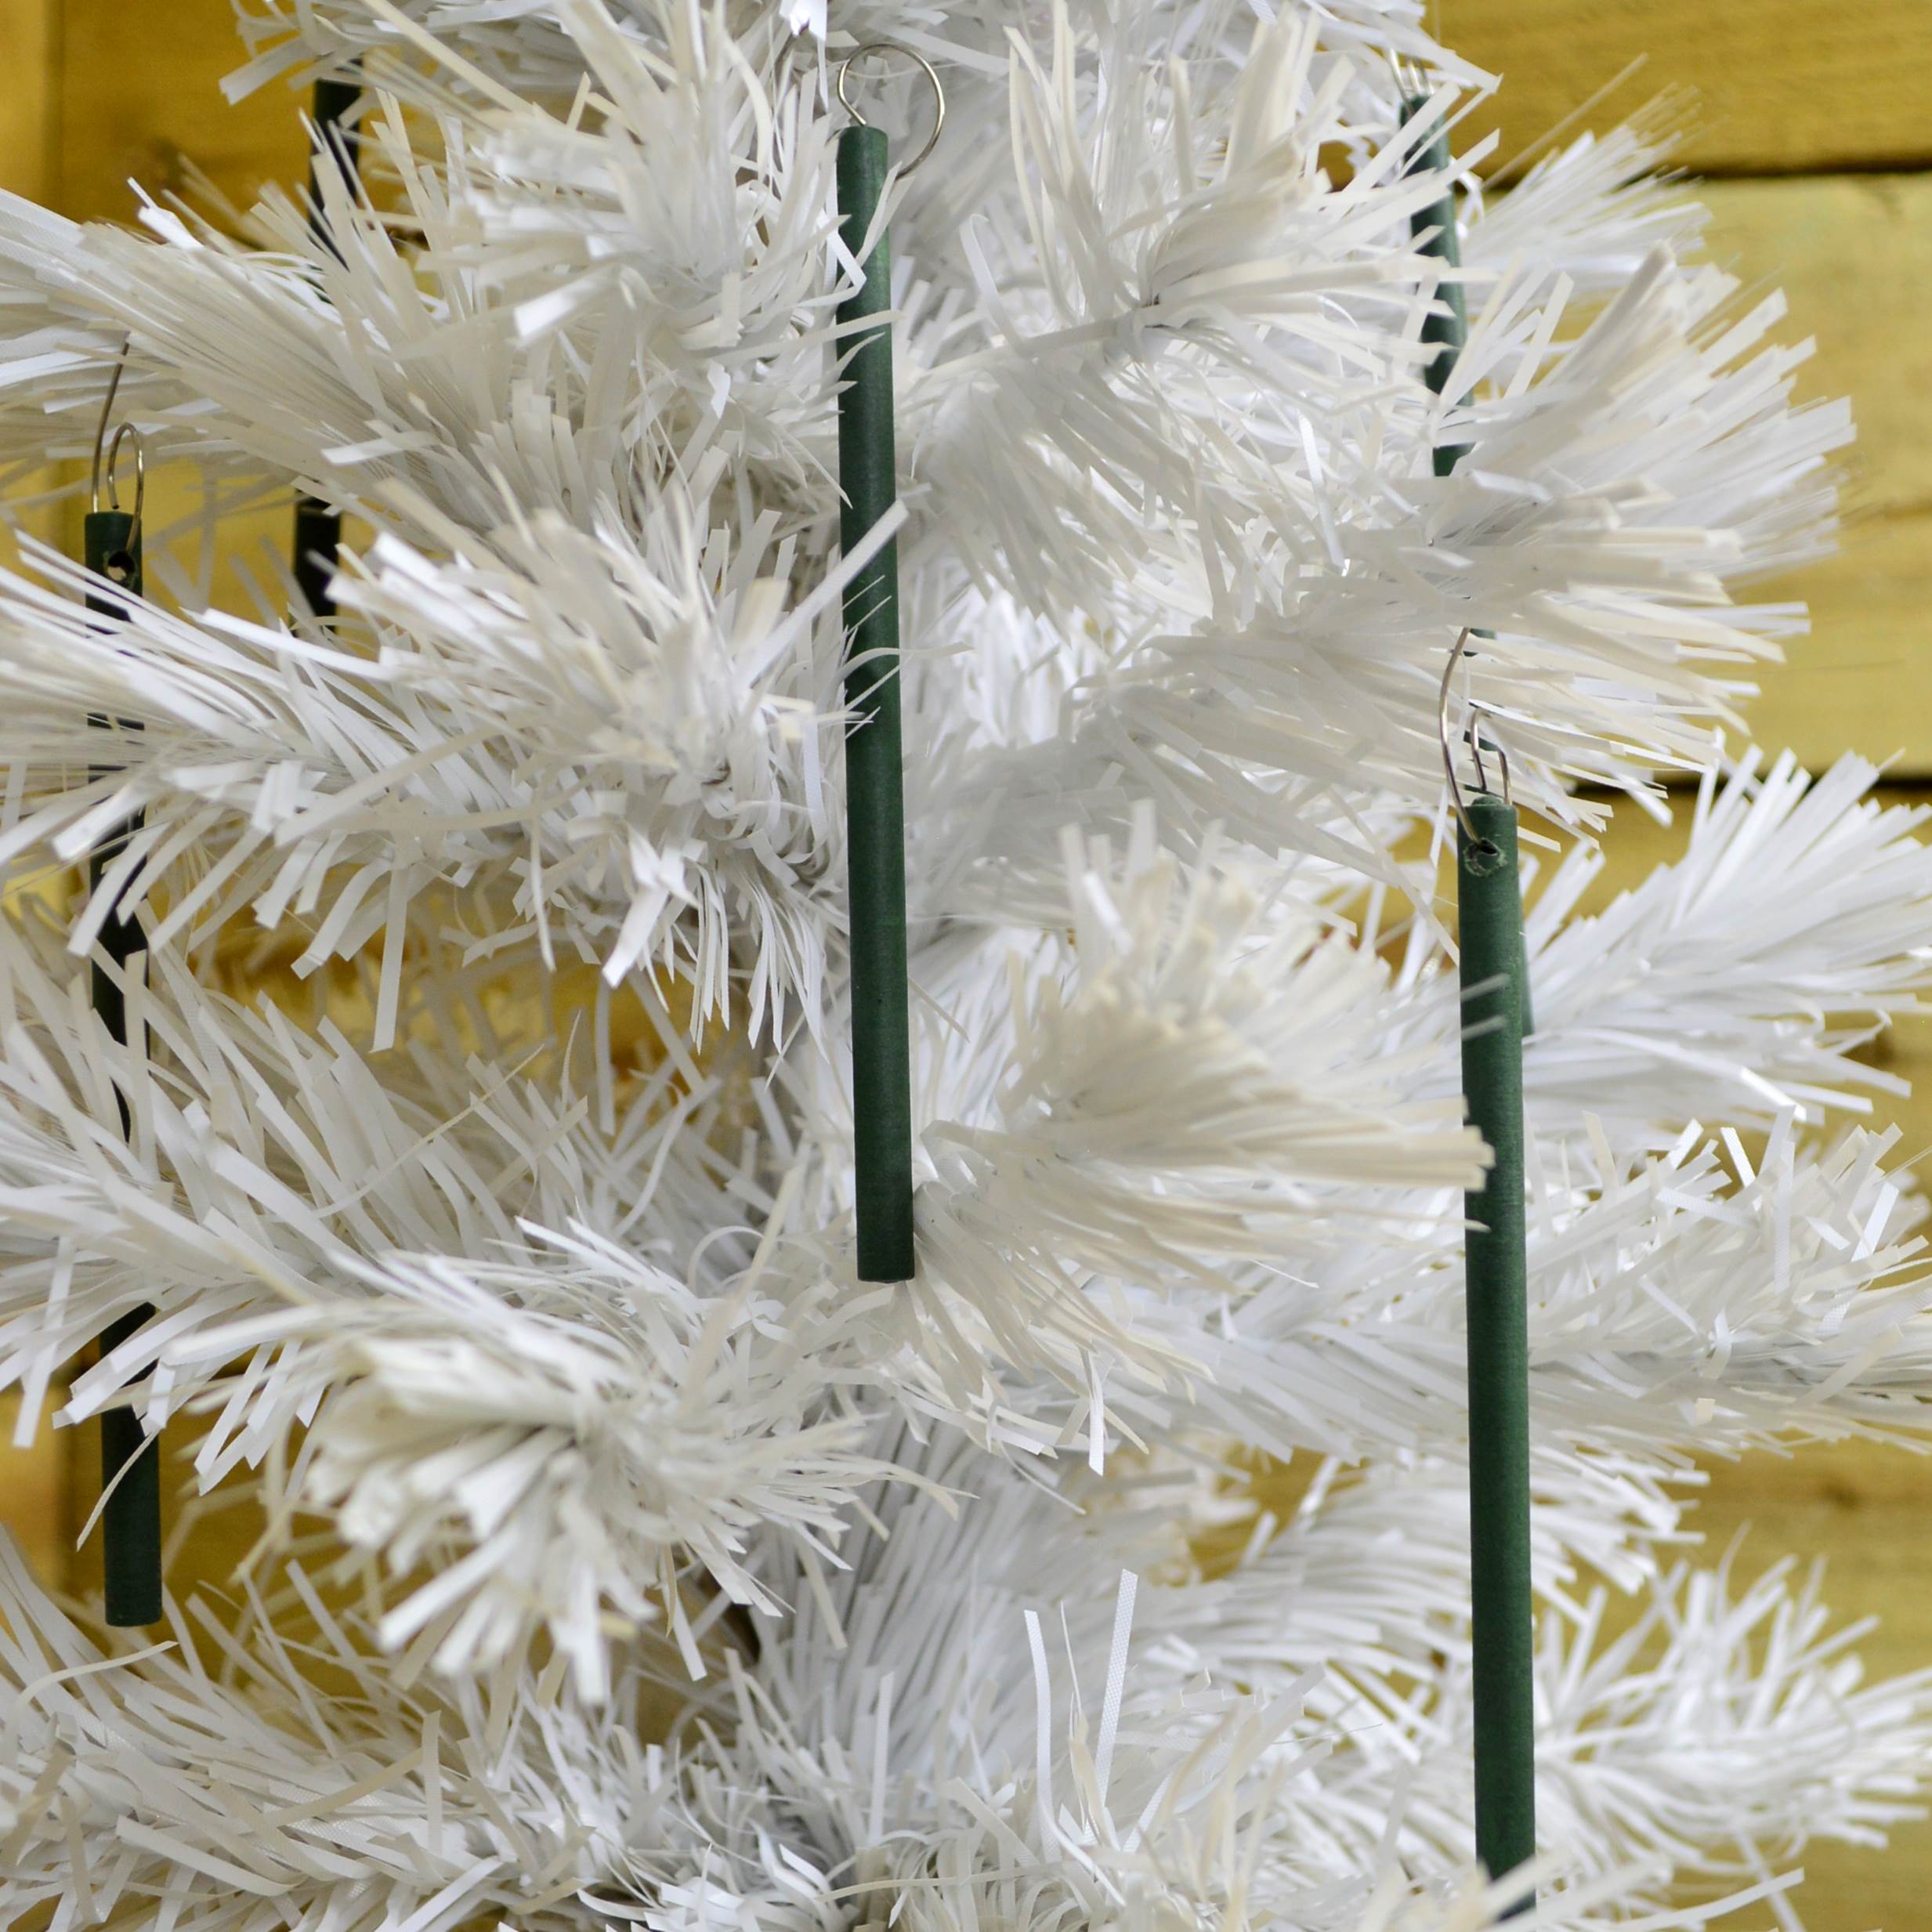 3 PACKS of 6 Scentsicles Scented Hanging Ornaments Sticks - O Christmas Tree